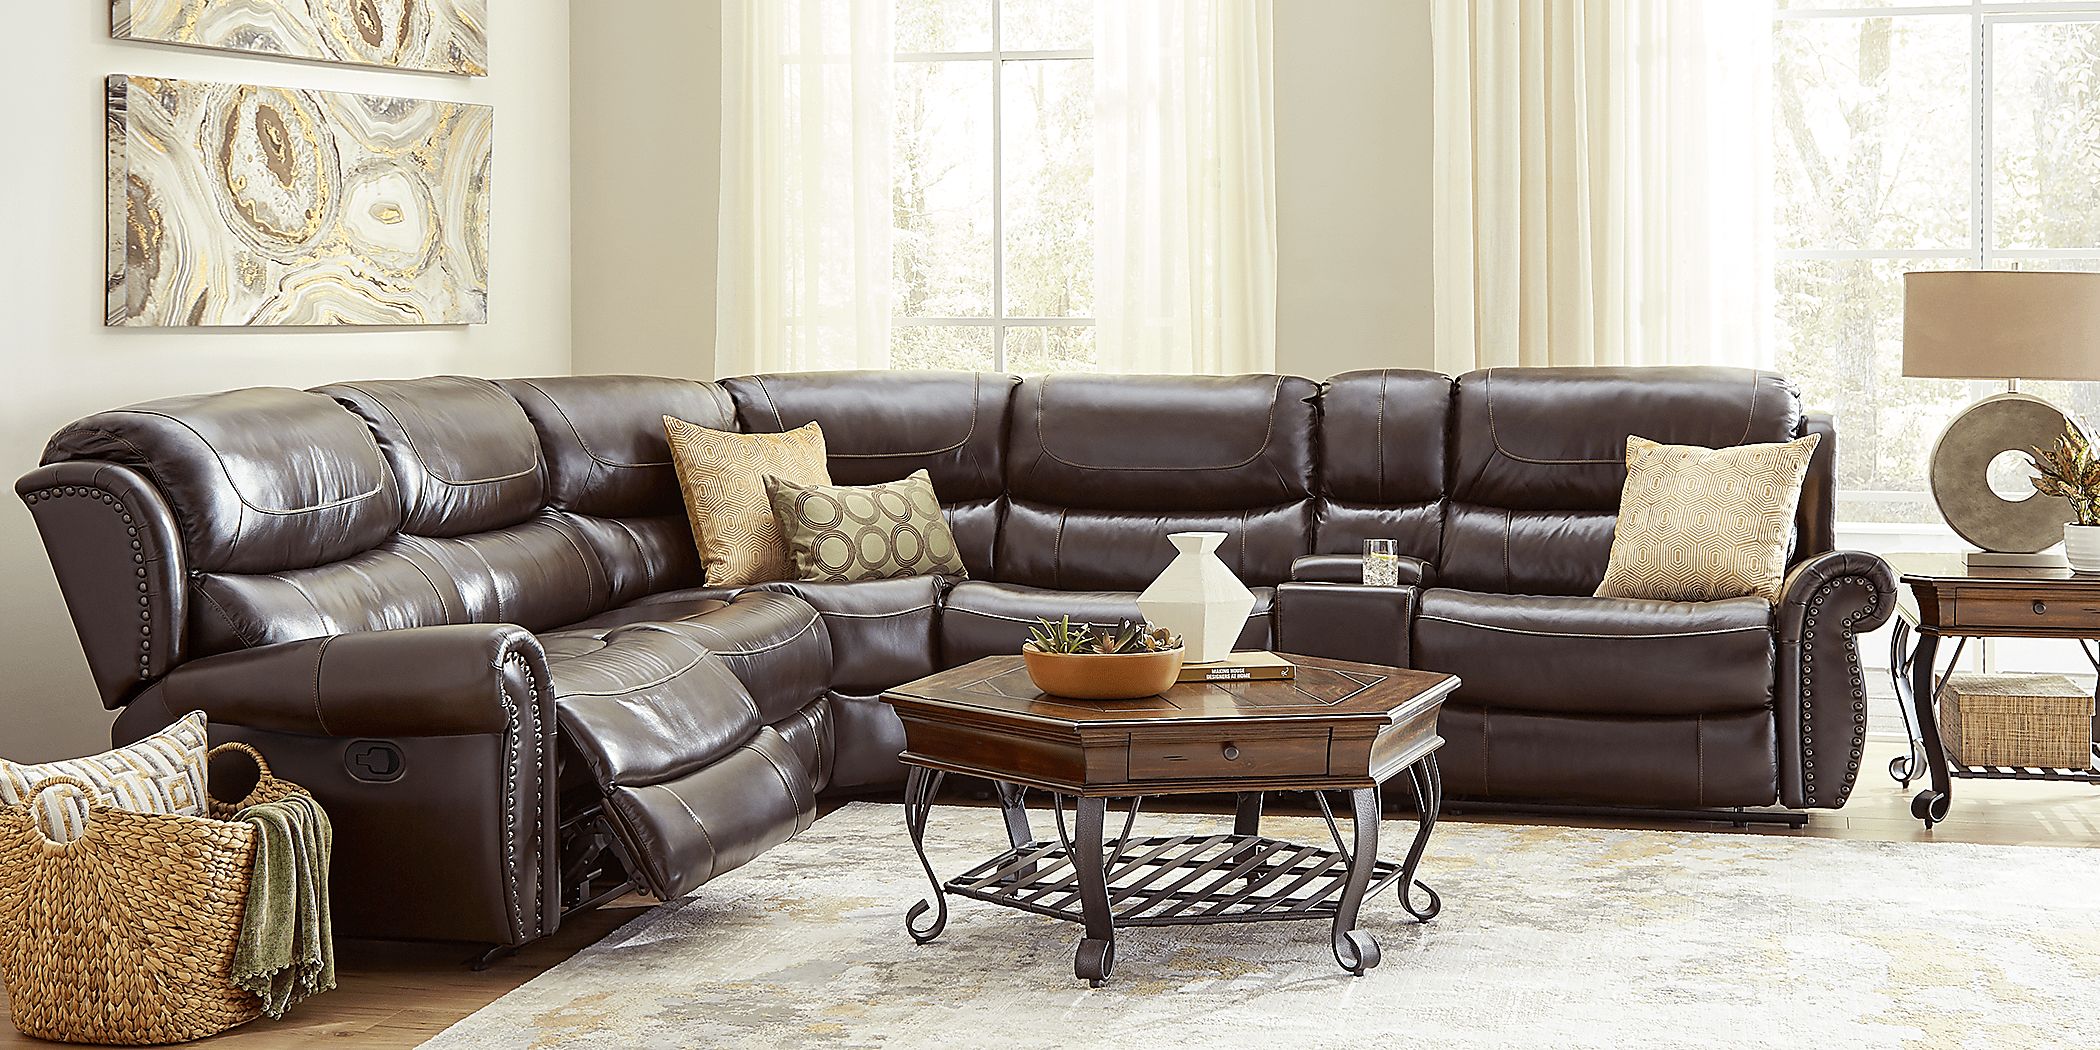 rooms to go veneto brown leather reclining sofa